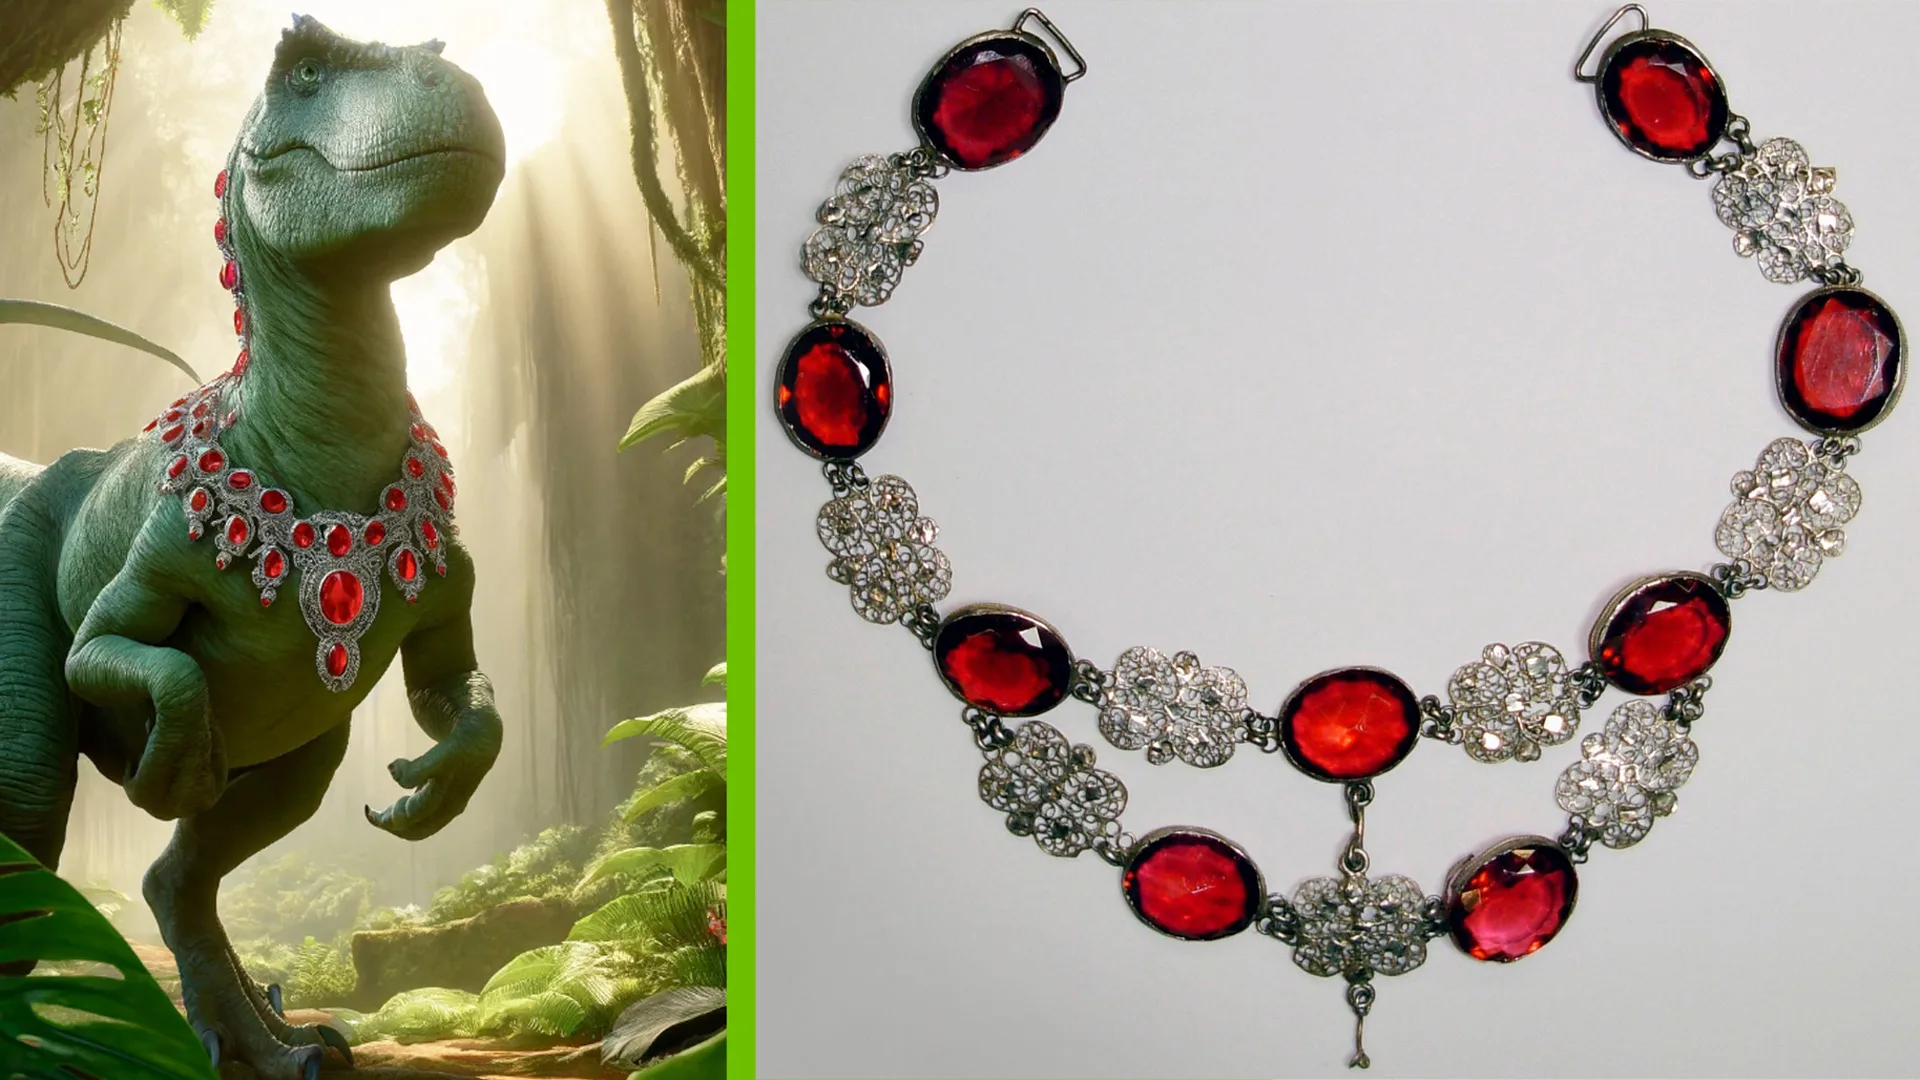 An AI generated image of a velociraptor in a necklace made of red and white stones - next to the real necklace from the V&A collection